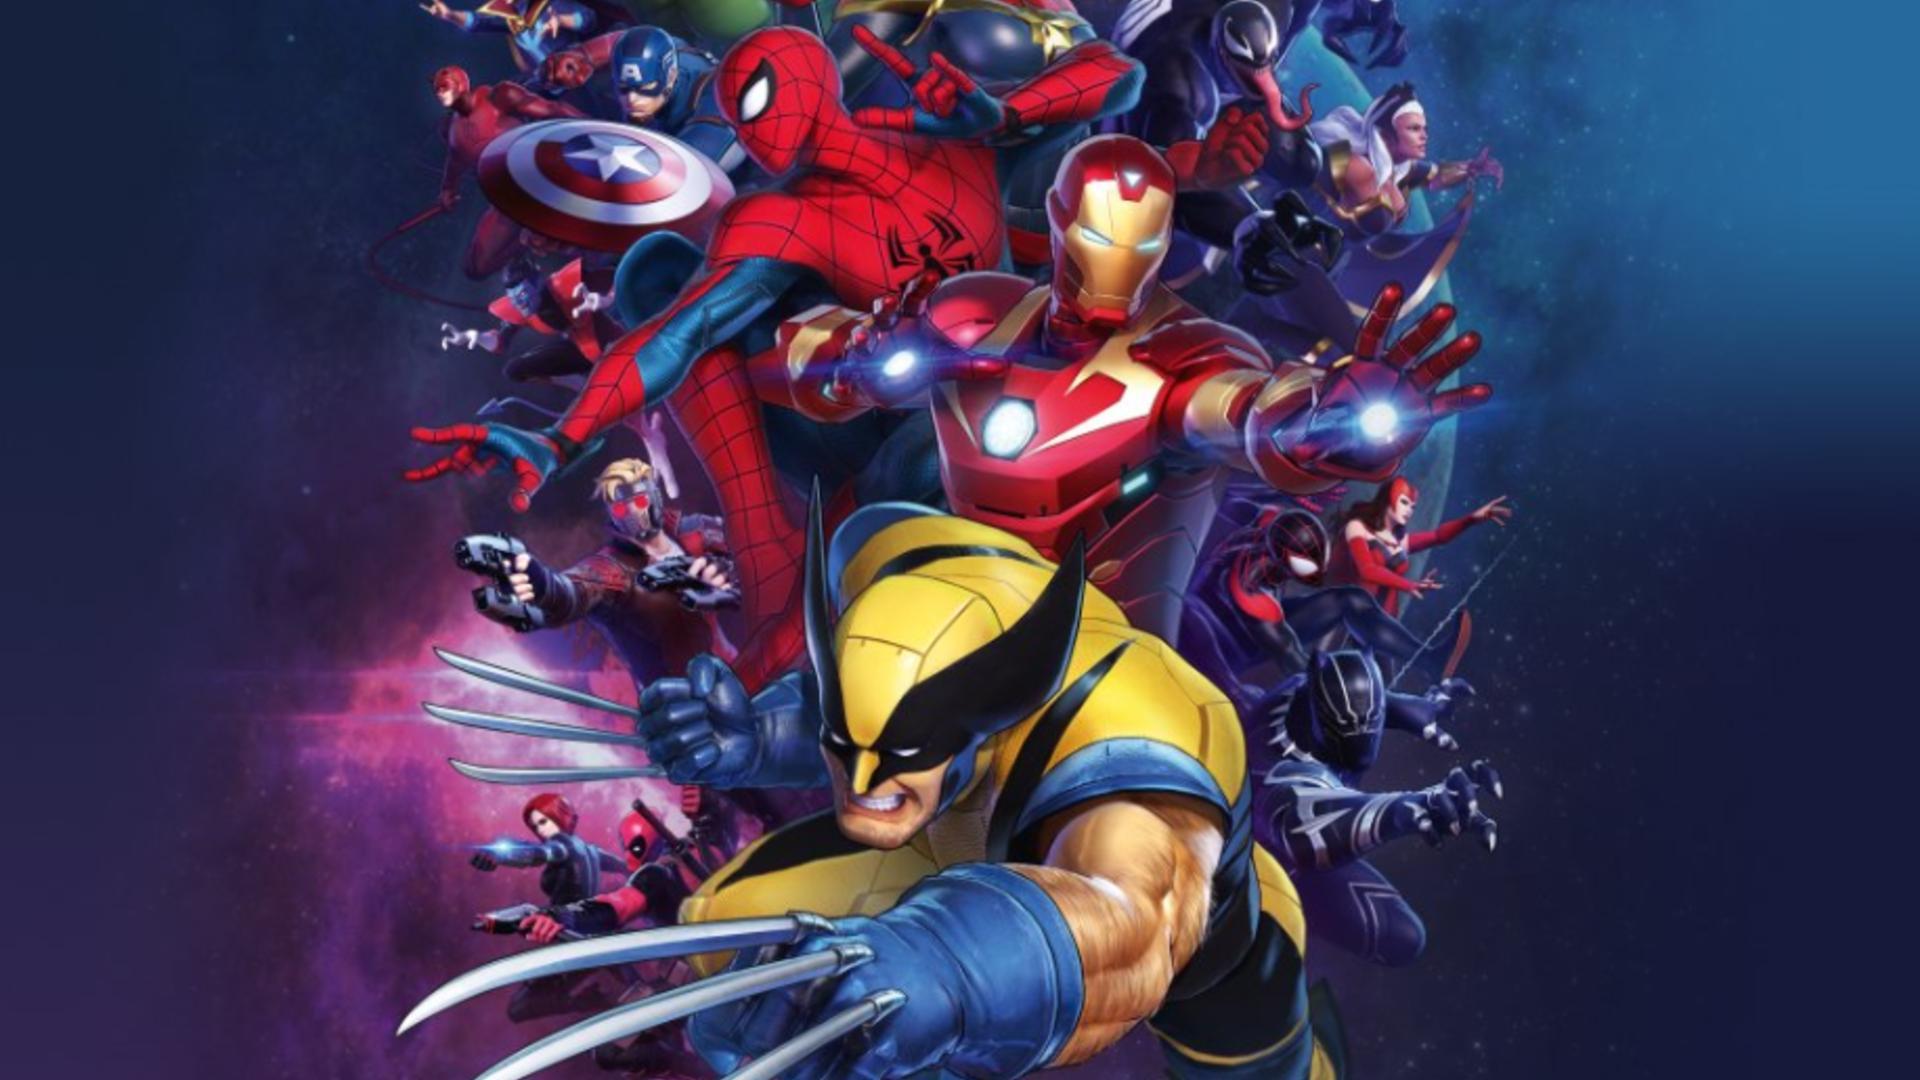 Marvel Ultimate Alliance 3 Reveals Two New Heroes, But Only One Has